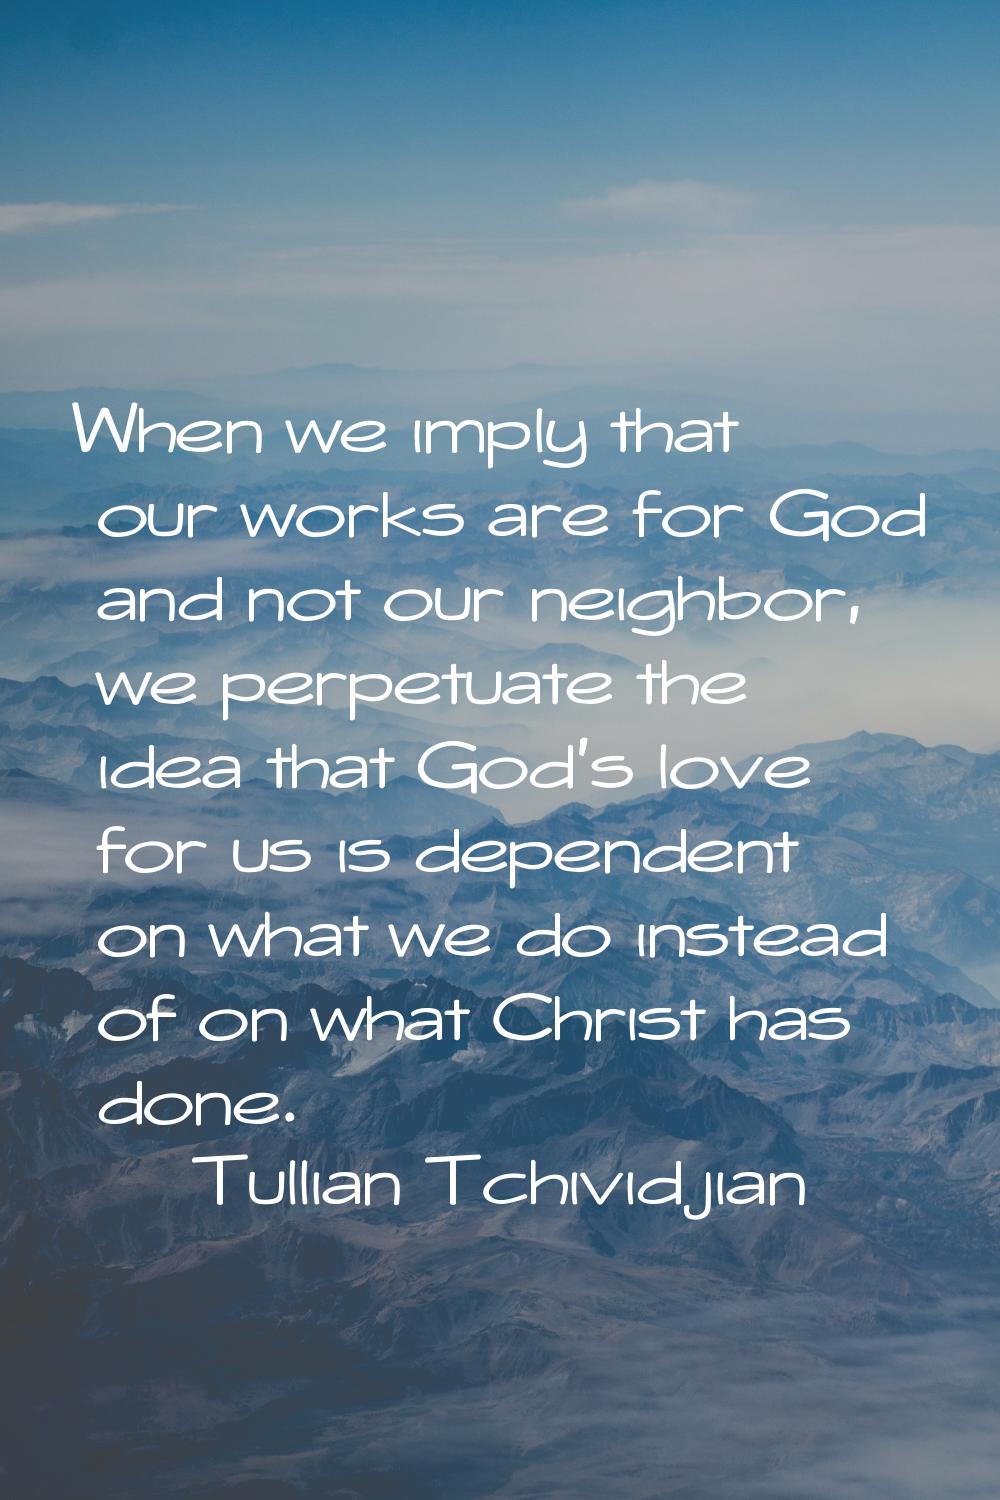 When we imply that our works are for God and not our neighbor, we perpetuate the idea that God's lo